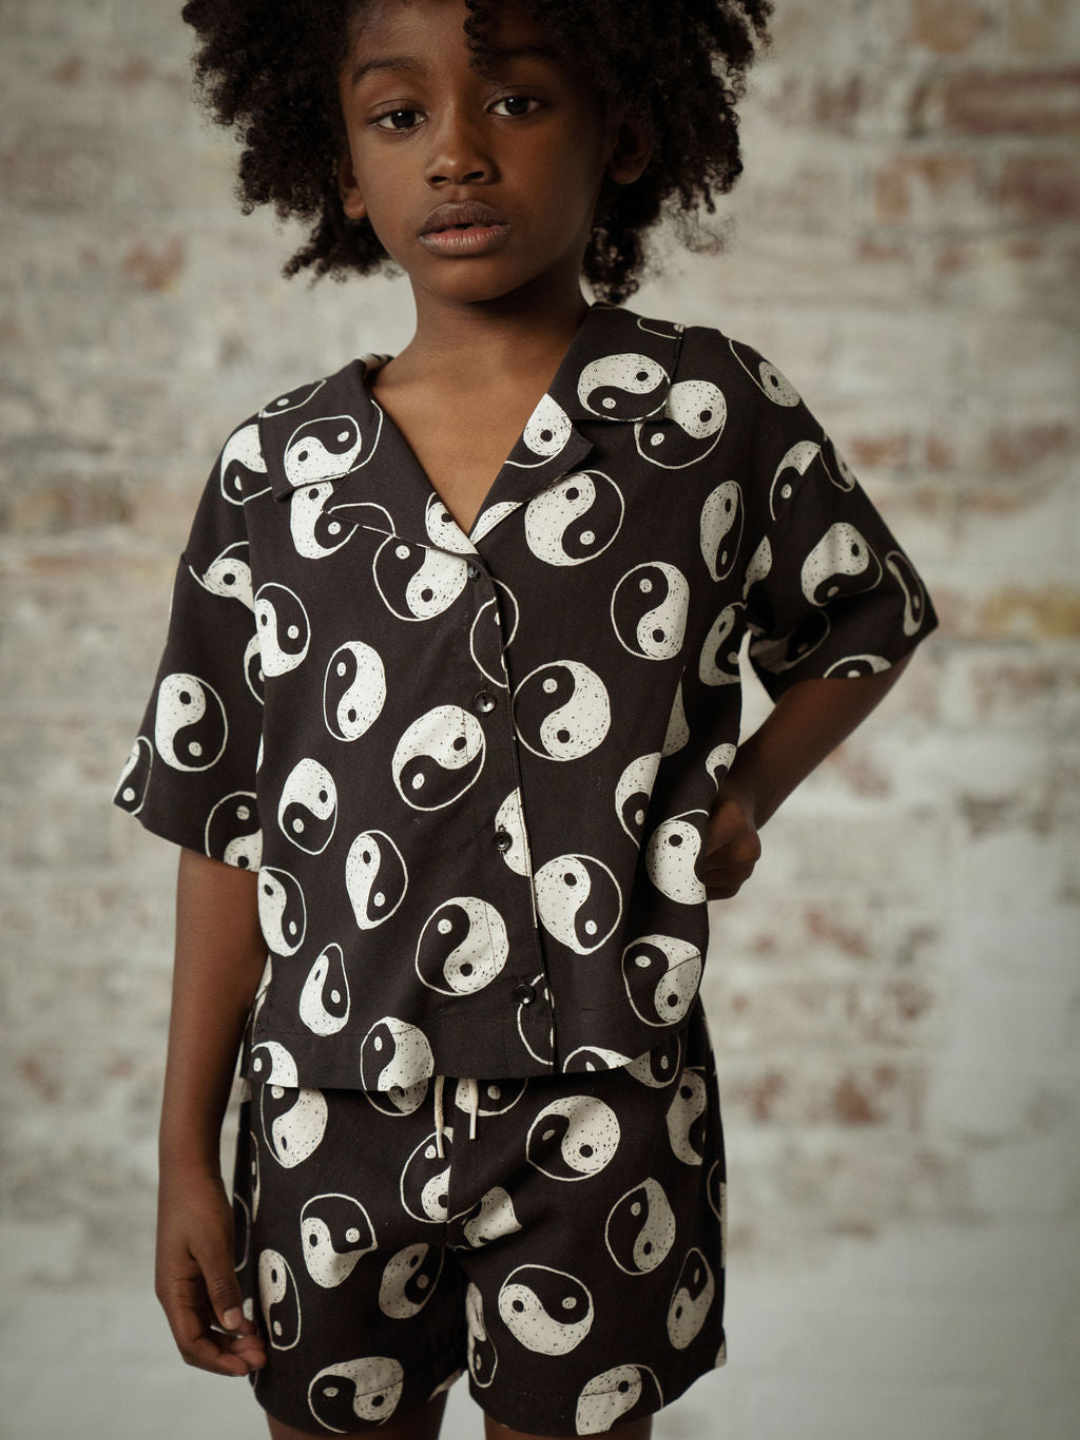 A front view of the black button up shirt with a yin and yang pattern all over on a child.